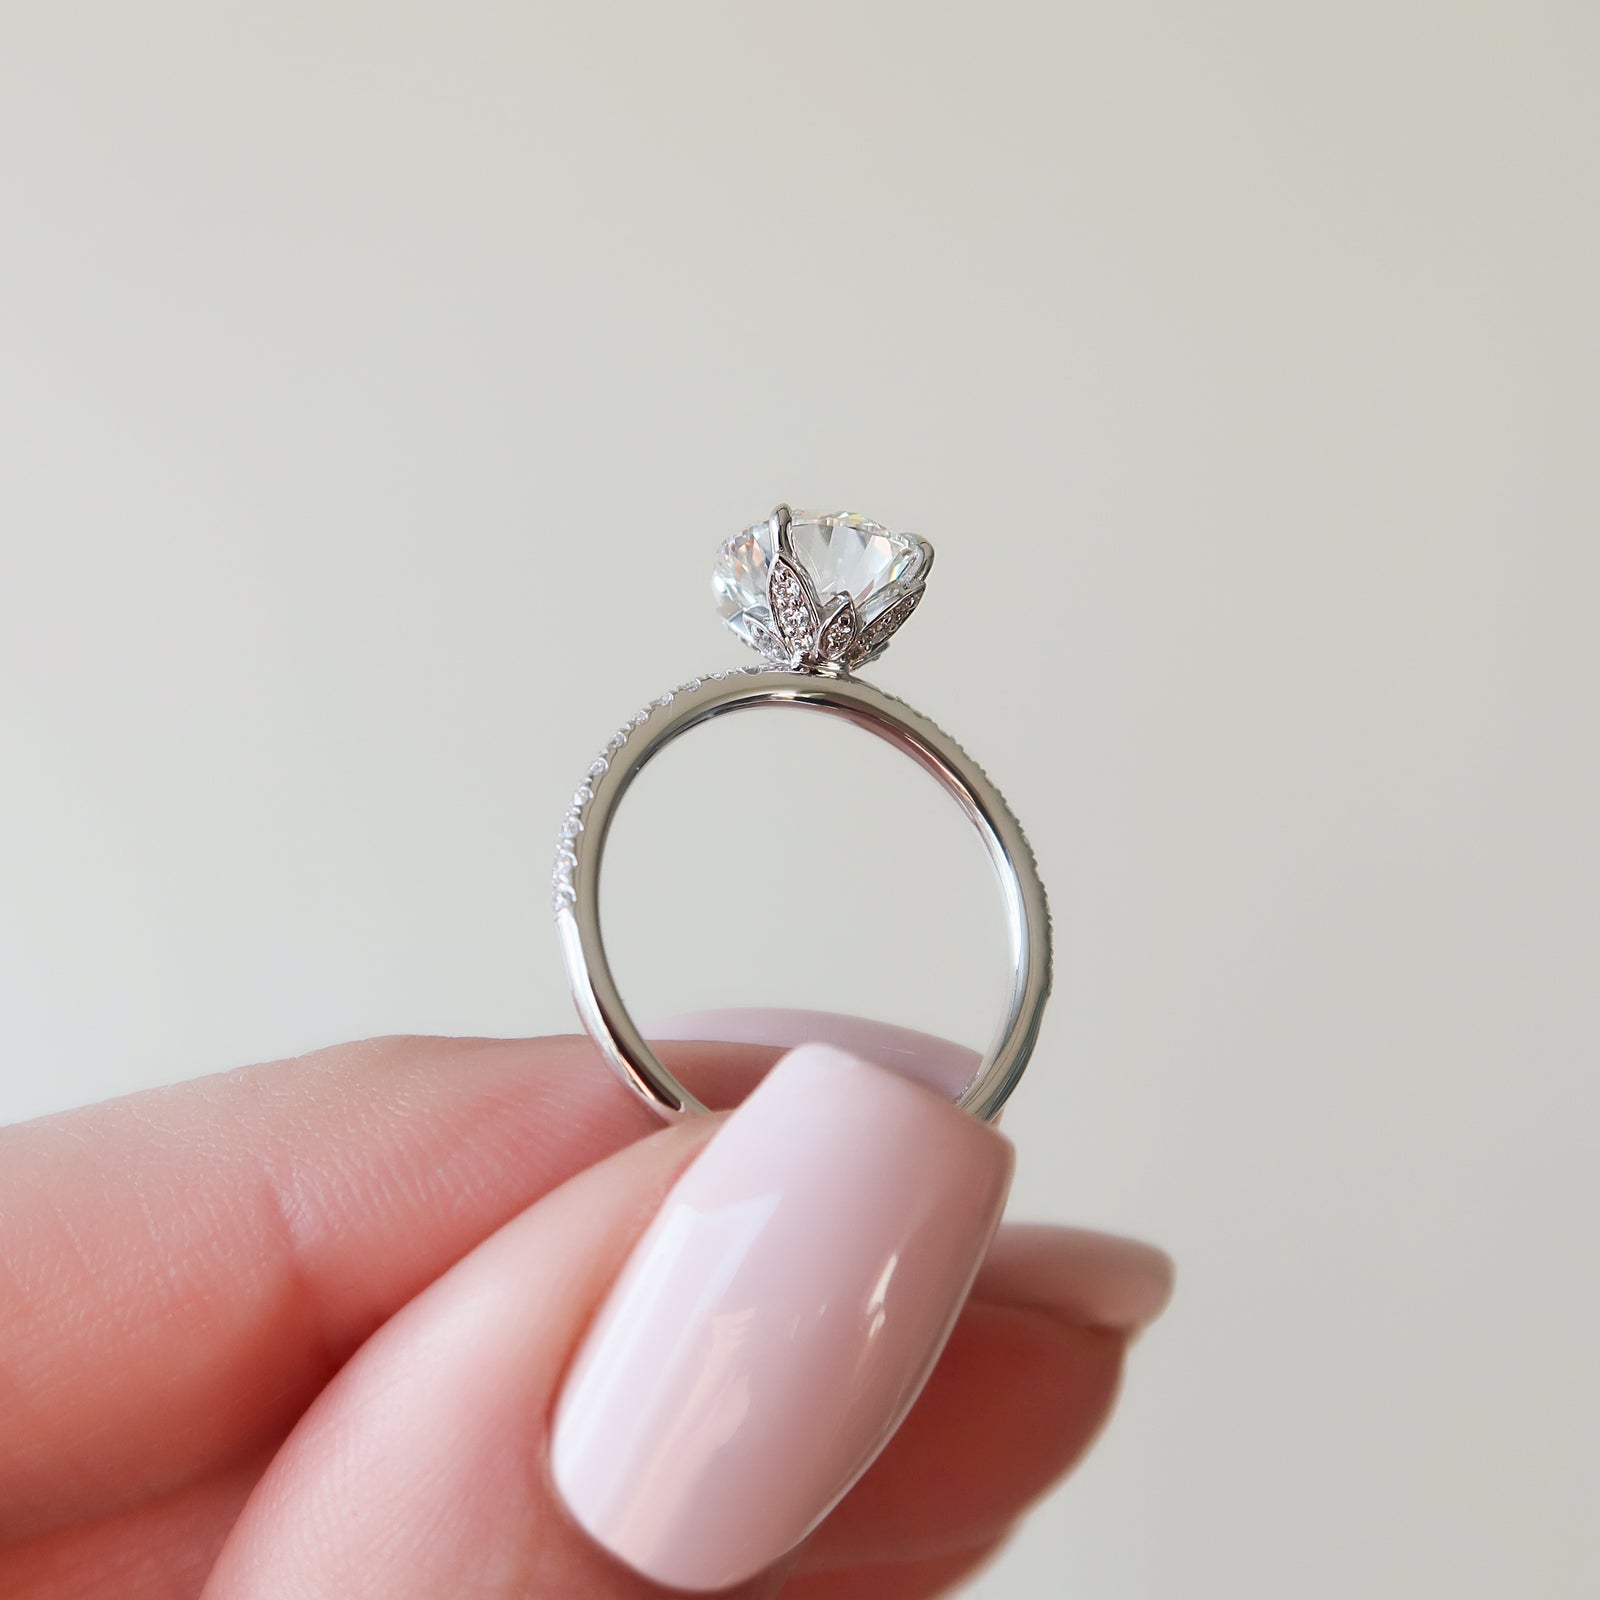 The Pave Lily WG R data-carat=2.5 data-metal=white-gold